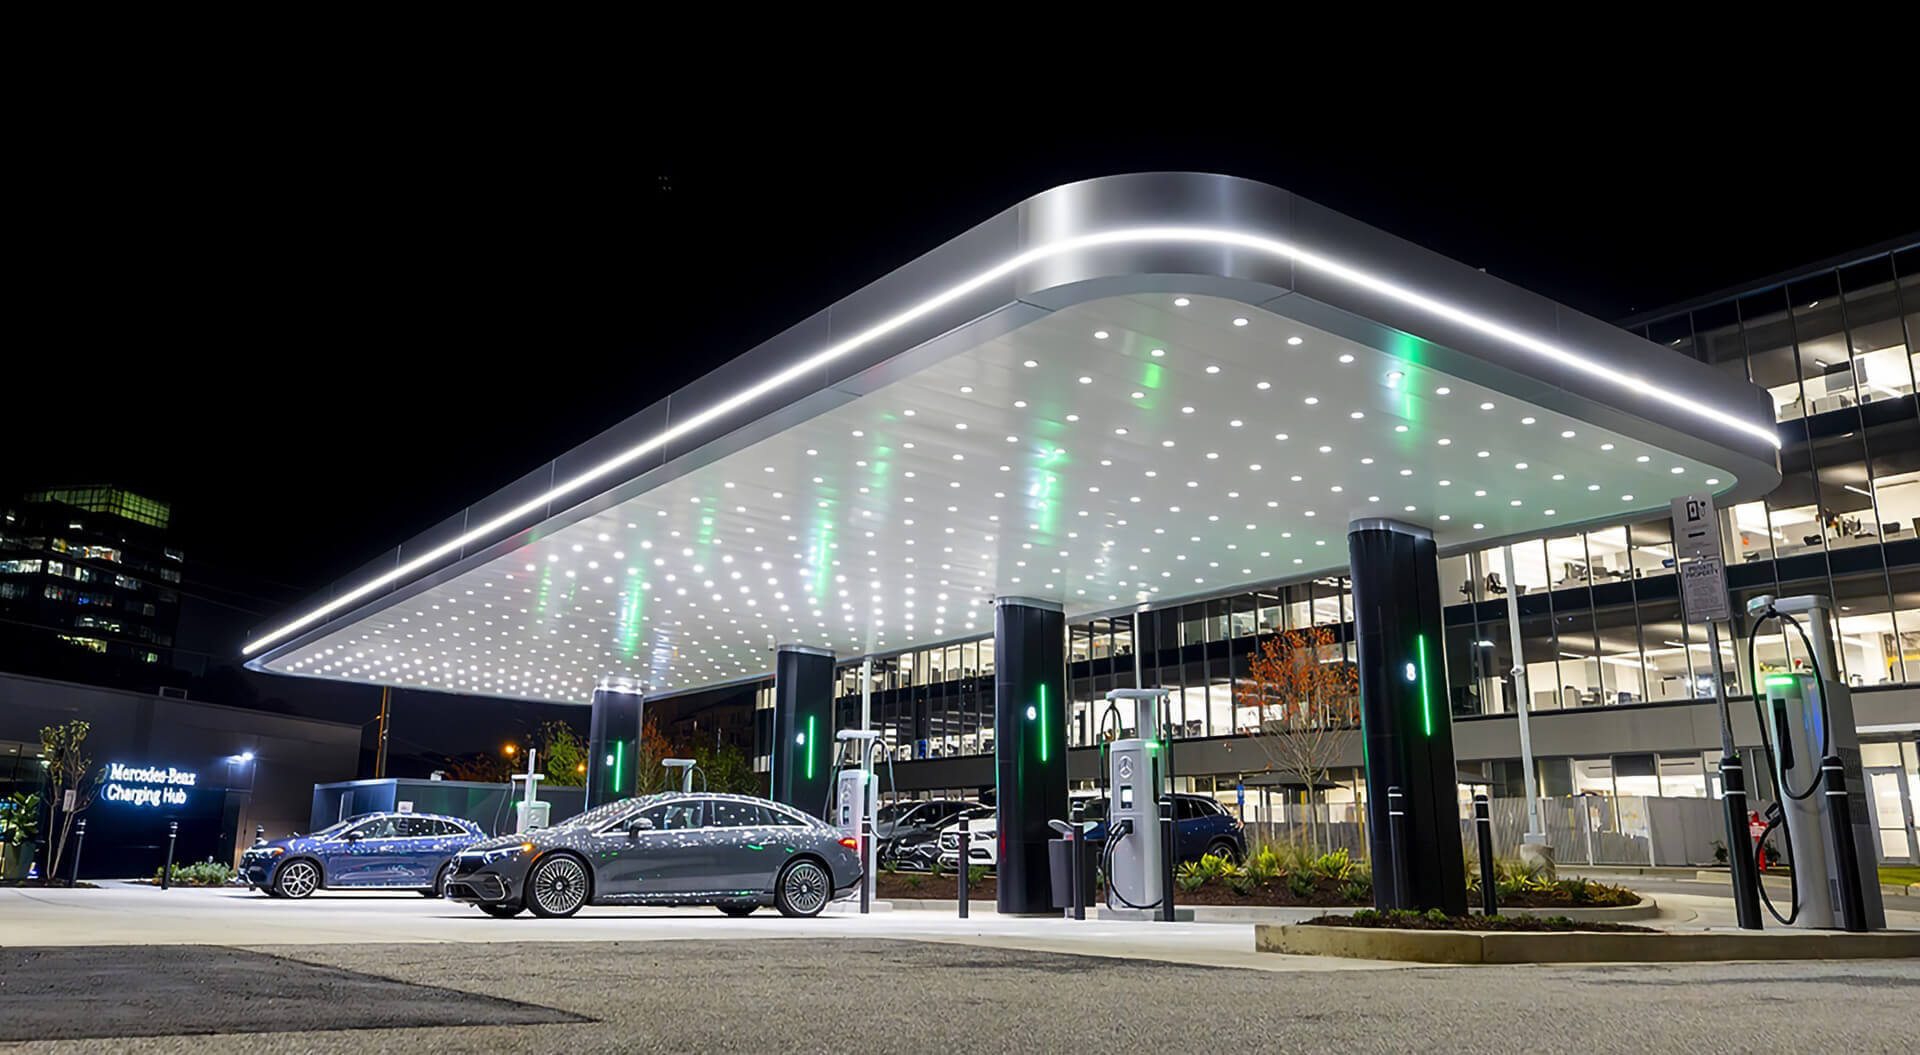 Creative Brand Concepts and Innovative Canopy Architecture, Petrol Forecourt Benchmark, Design Specialists, Graphics - CampbellRigg Agency